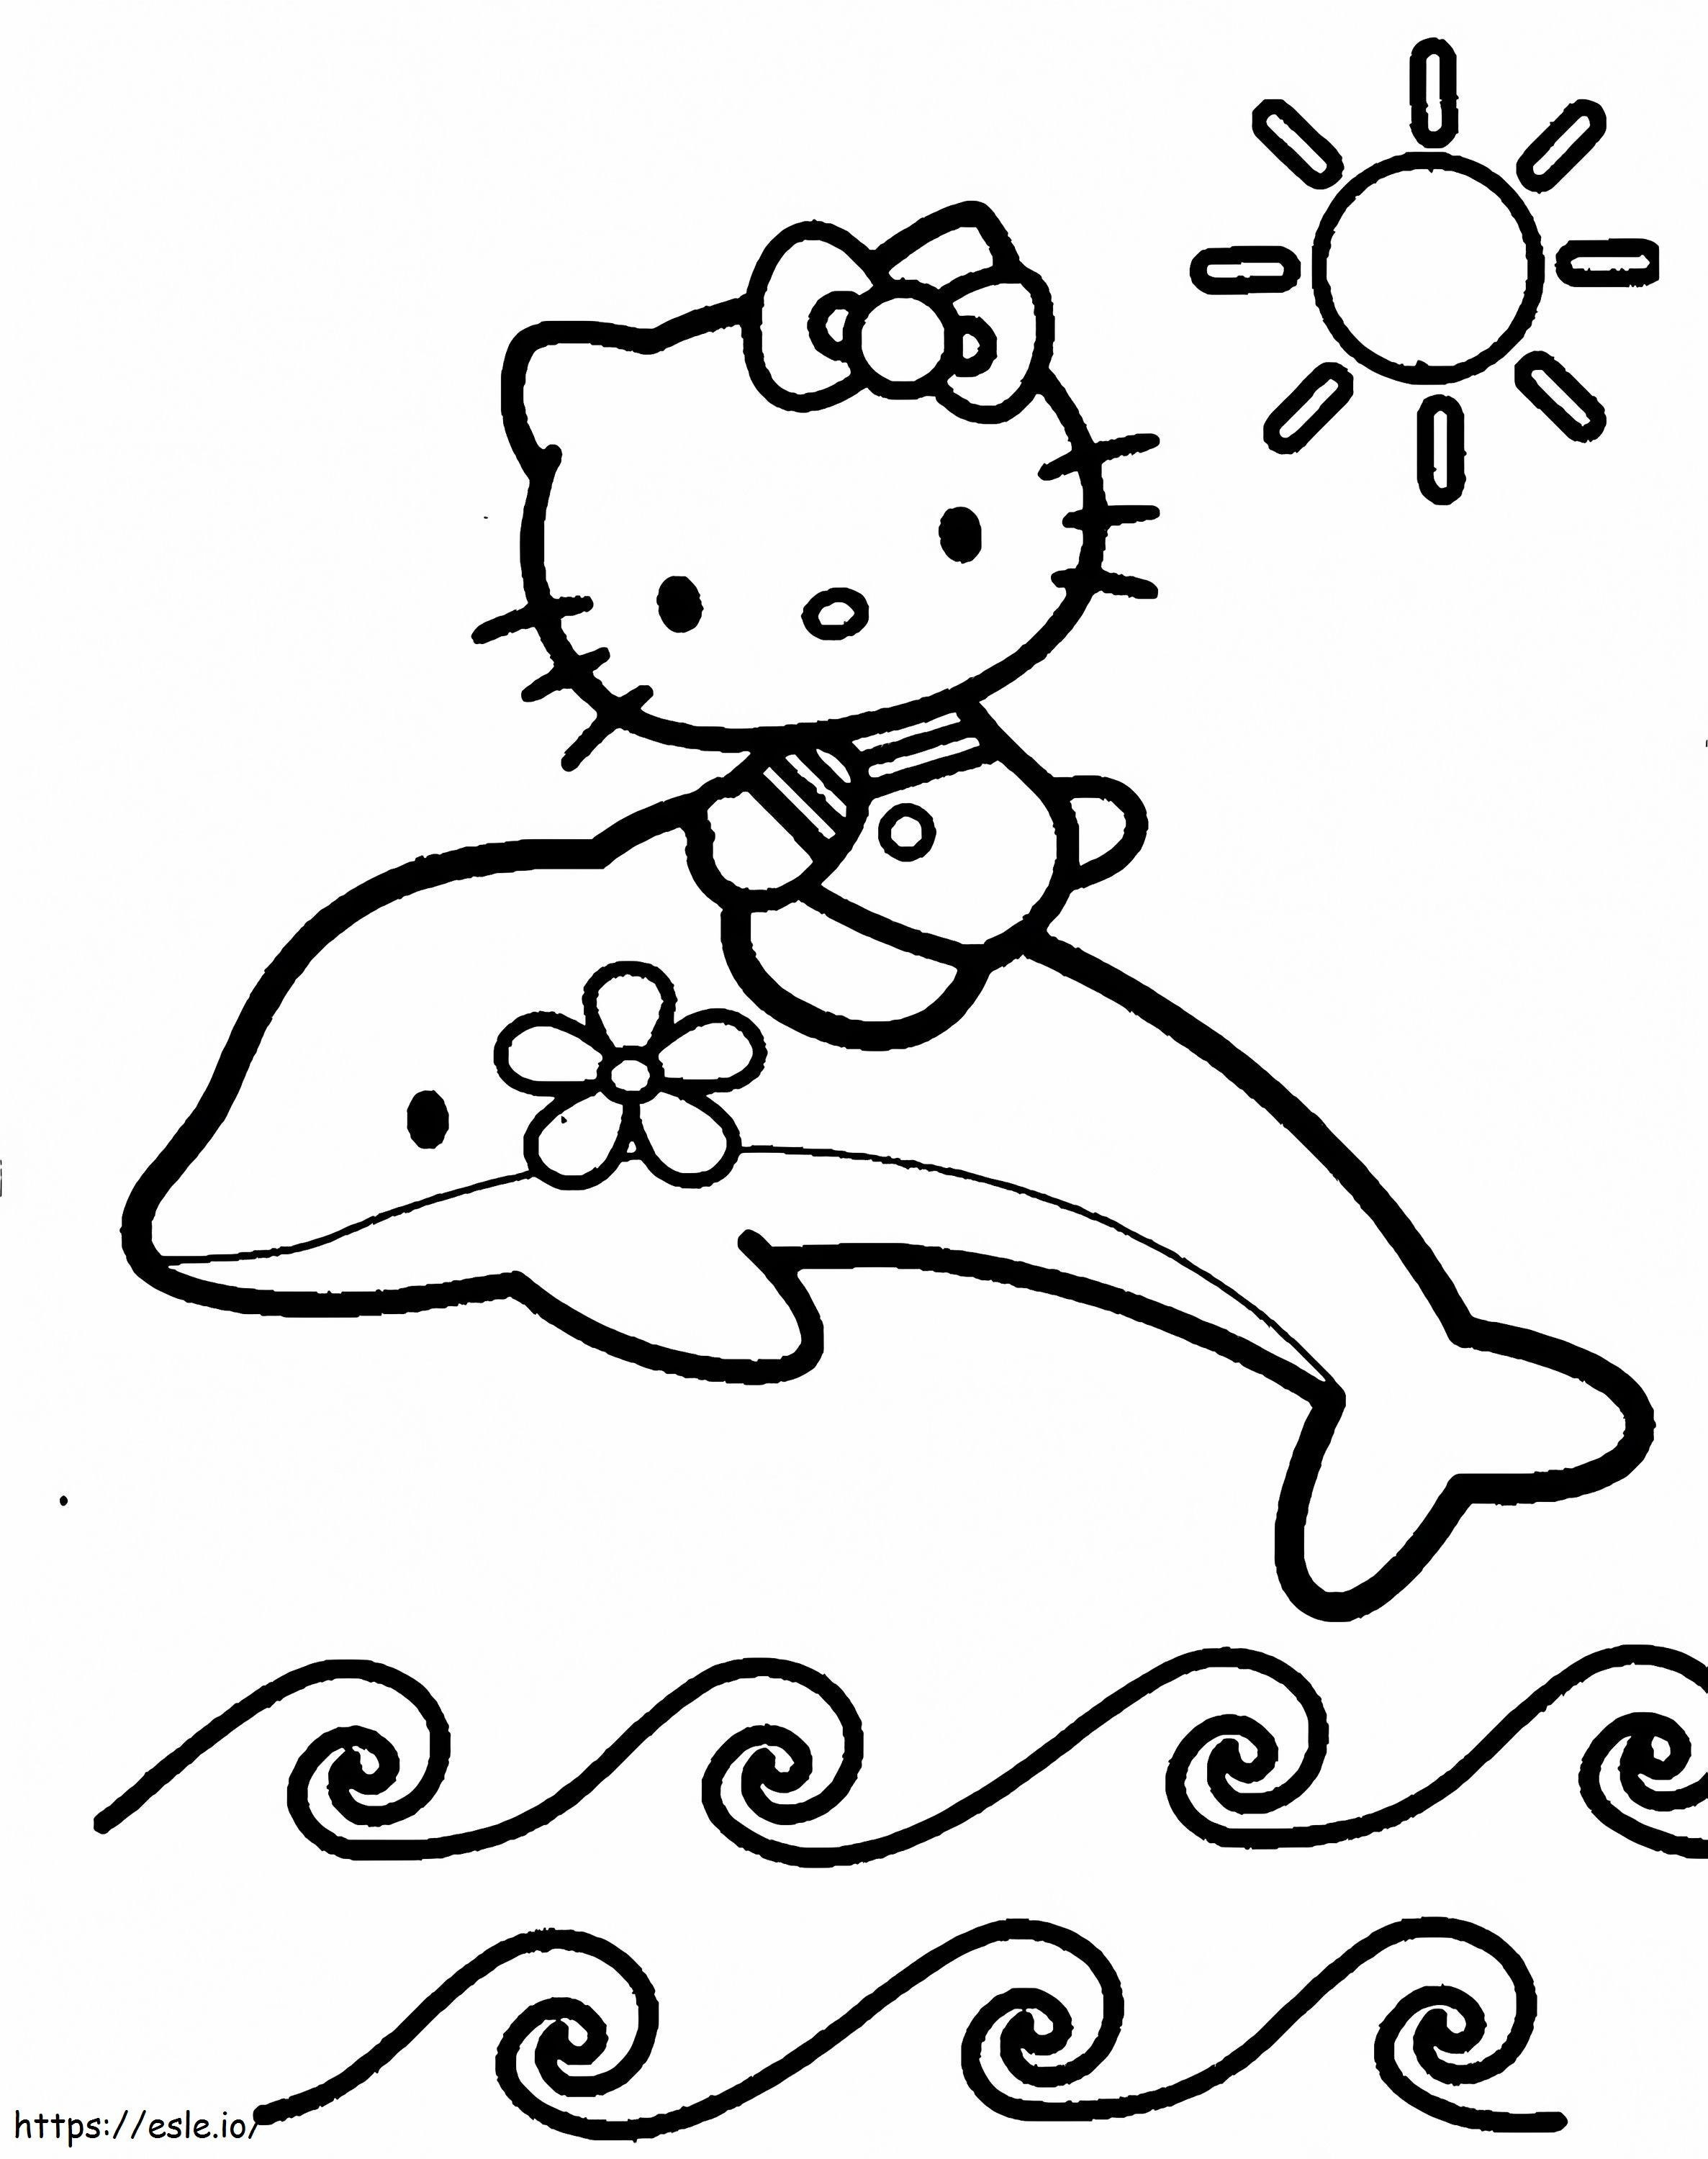 Hellokitty10 coloring page